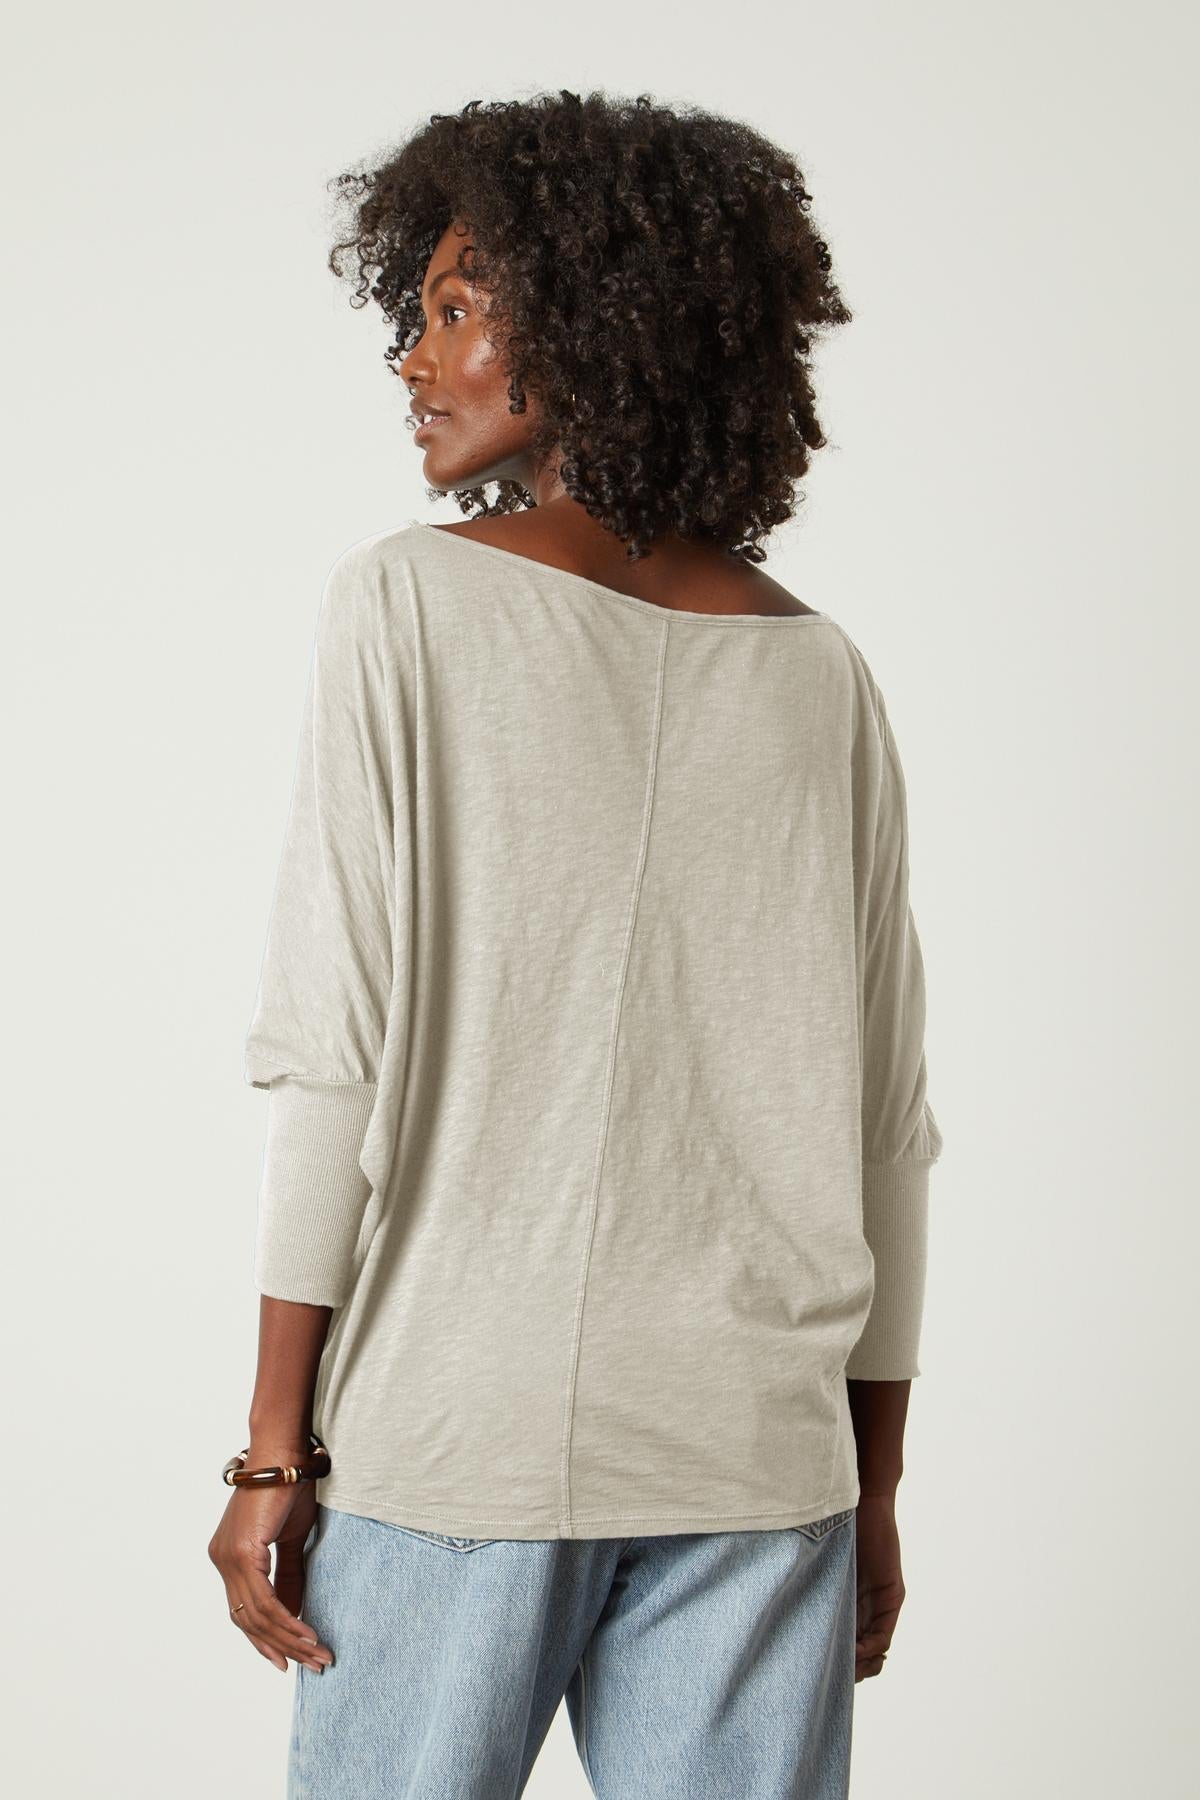 The back view of a woman wearing a Velvet by Graham & Spencer JOSS DOLMAN SLEEVE TEE and jeans.-35206719504577